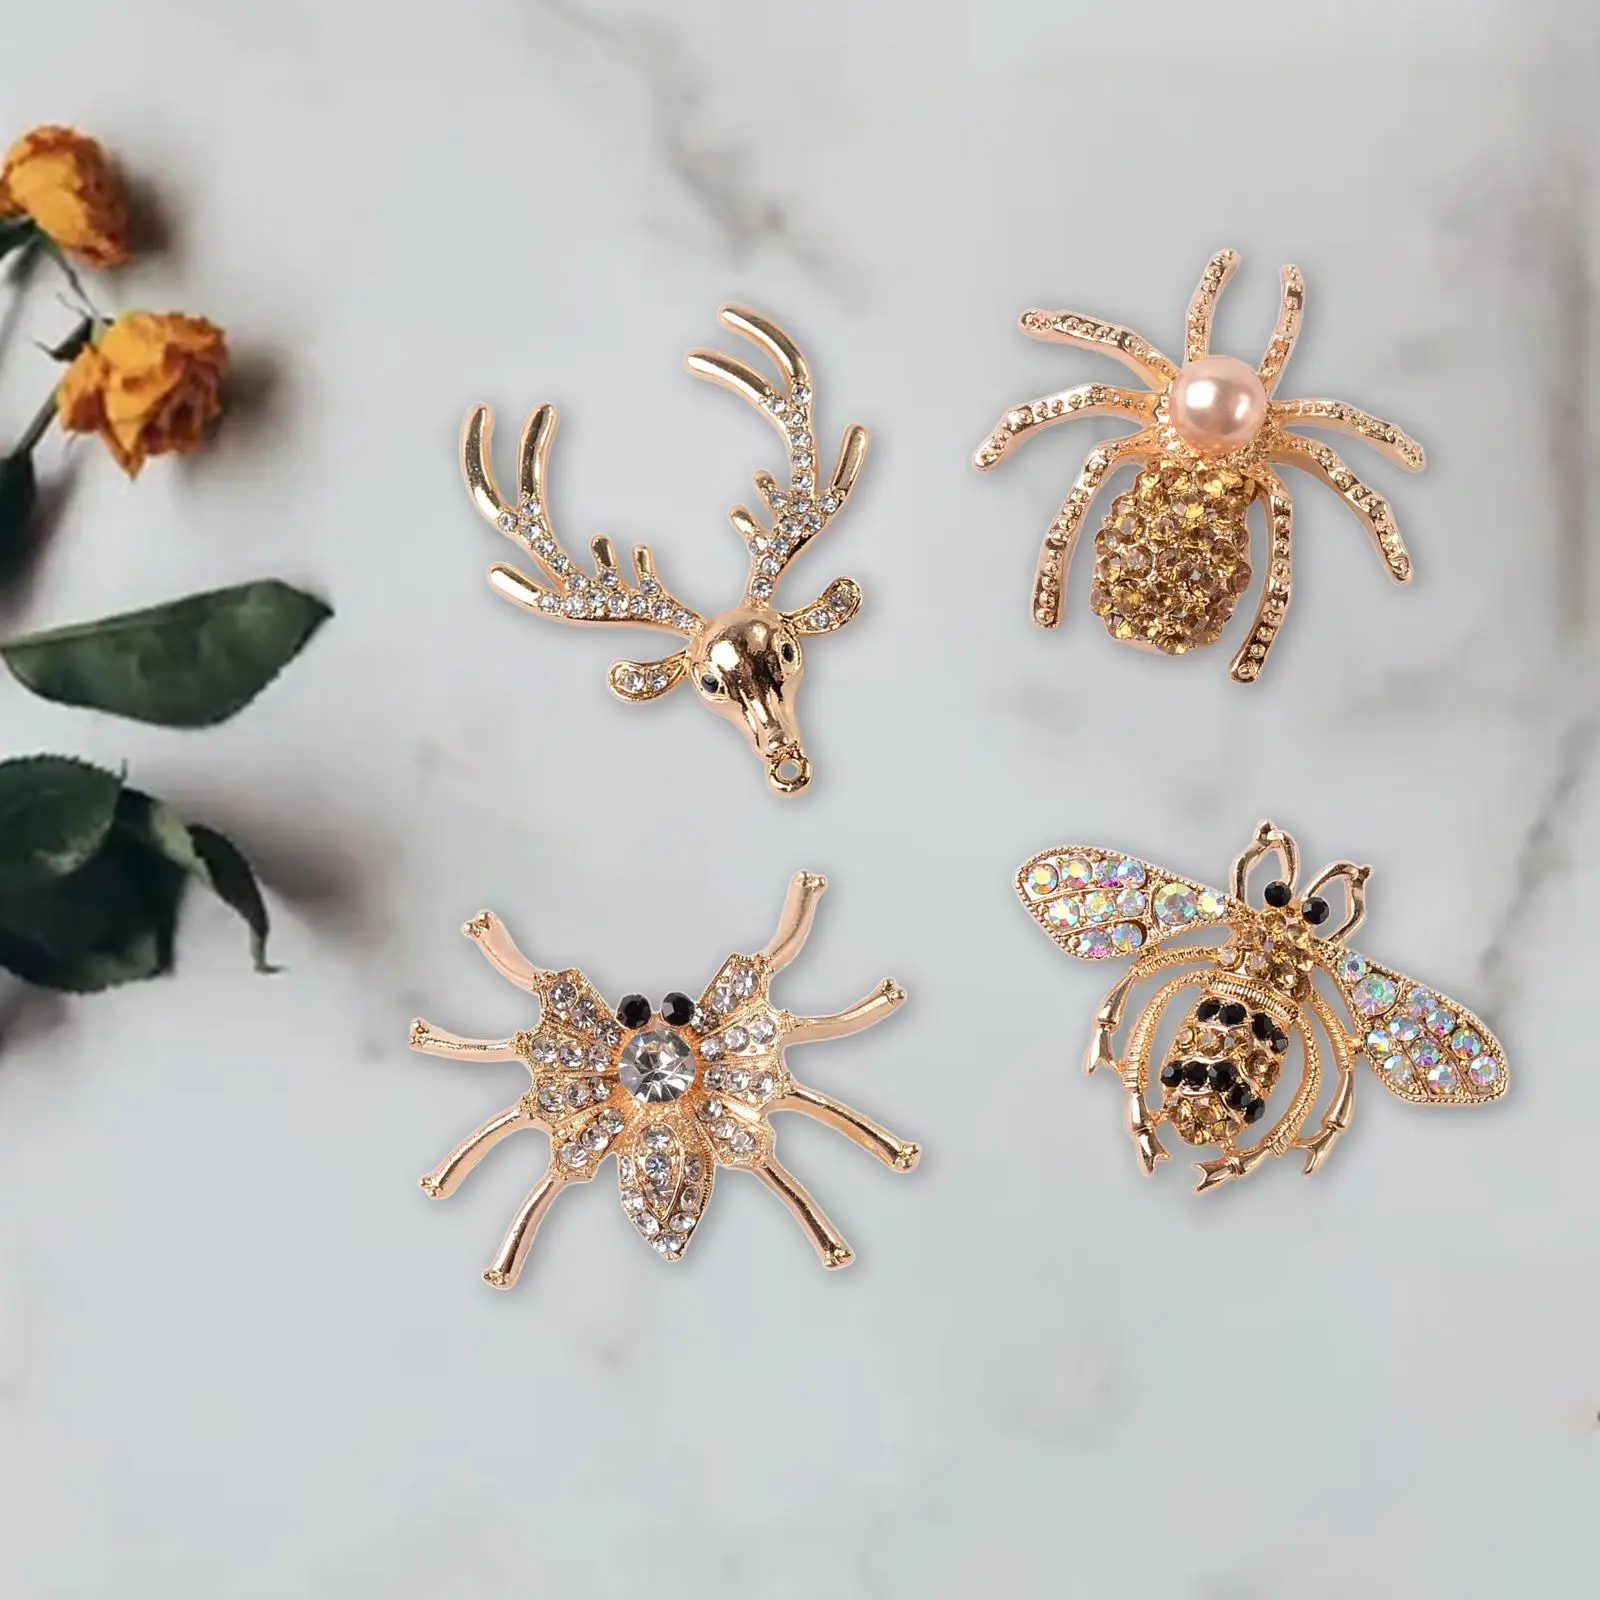 4Pcs  Spider Deer Cabochons Flatback Charms DIY Crafting for Jewelry Making  Embellishment and Party Decorations